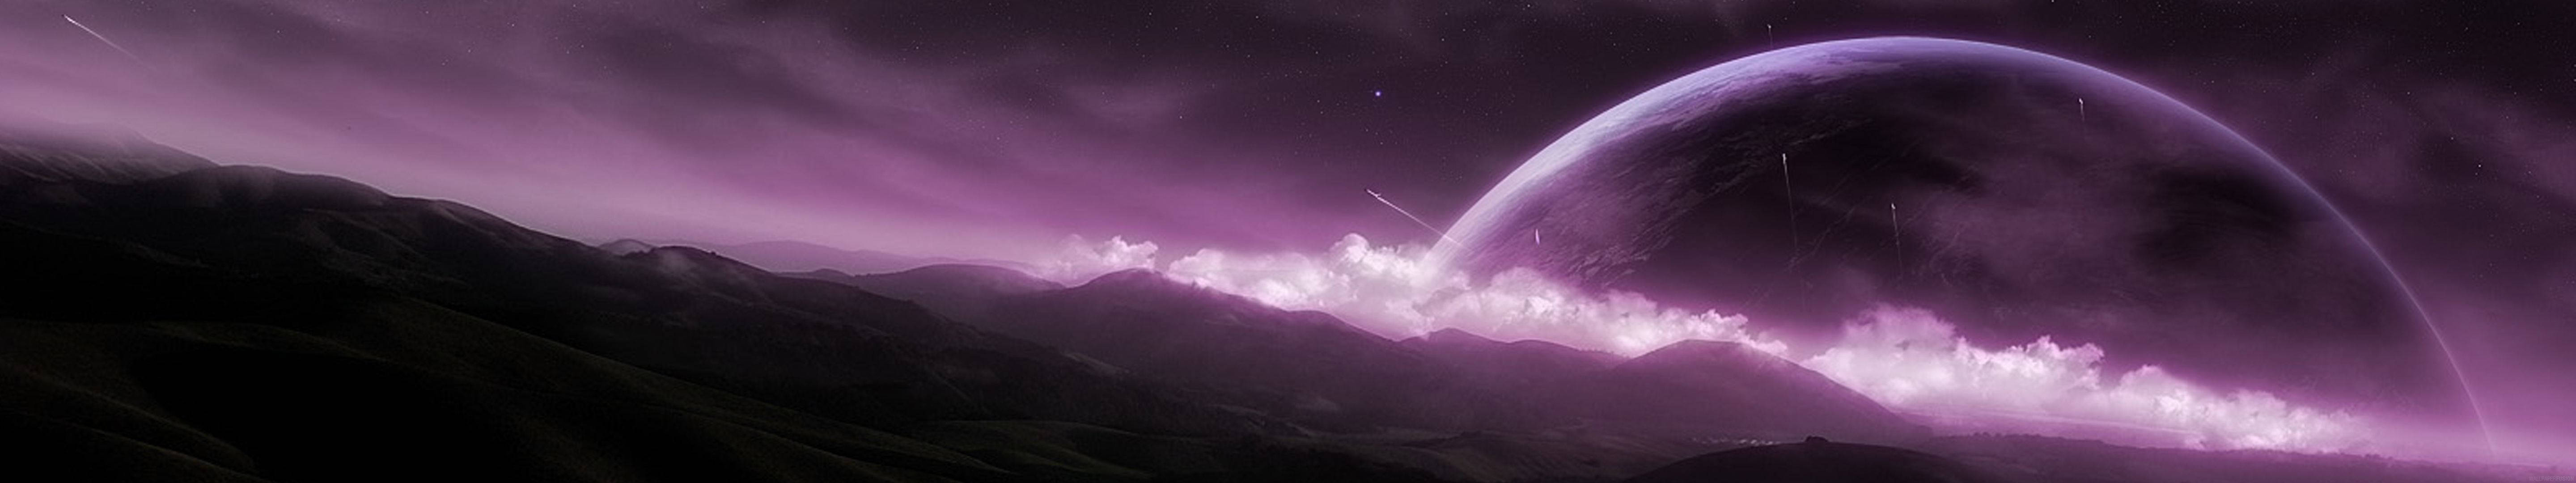 Giant Purple Earth Over Mountains Background